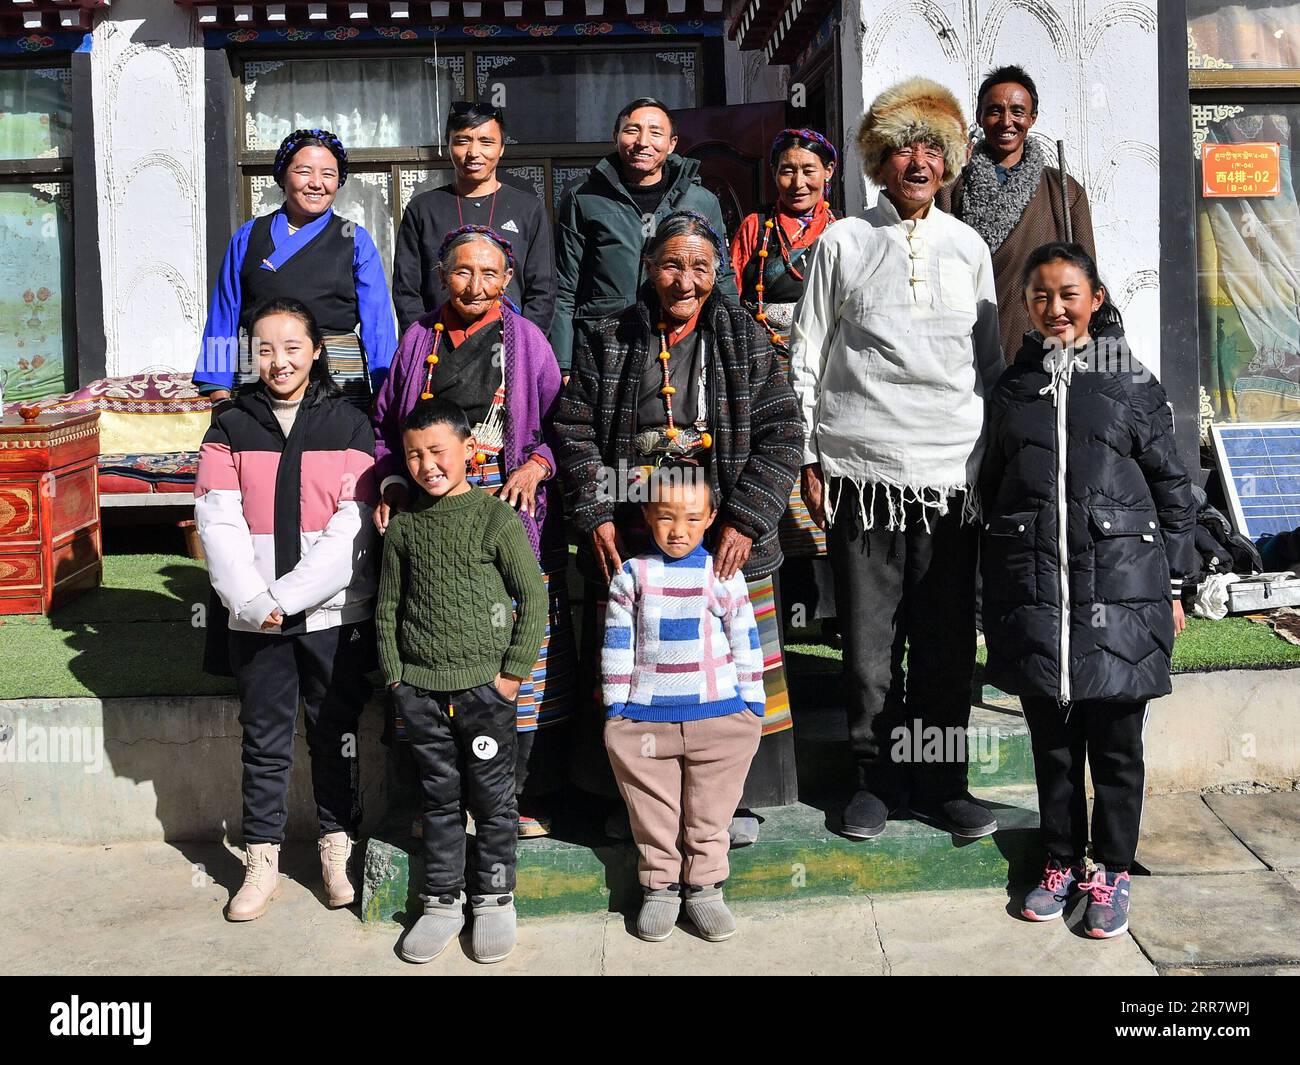 210406 -- LHASA, April 6, 2021 -- Dacho C poses for a photo with her family members at home in Lalho Township, Saga County of Xigaze, southwest China s Tibet Autonomous Region, Jan. 14, 2021. Dacho, born in 1929, is a resident in Lalho Township, Saga County of Xigaze, southwest China s Tibet Autonomous Region. She was made a serf in her early childhood and had suffered an unimaginable ordeal until the democratic reform in 1959. The serf owner kept a roster listing dates of birth of all local residents, who would be made serfs at certain age, regardless of gender or health condition, Dacho reca Stock Photo